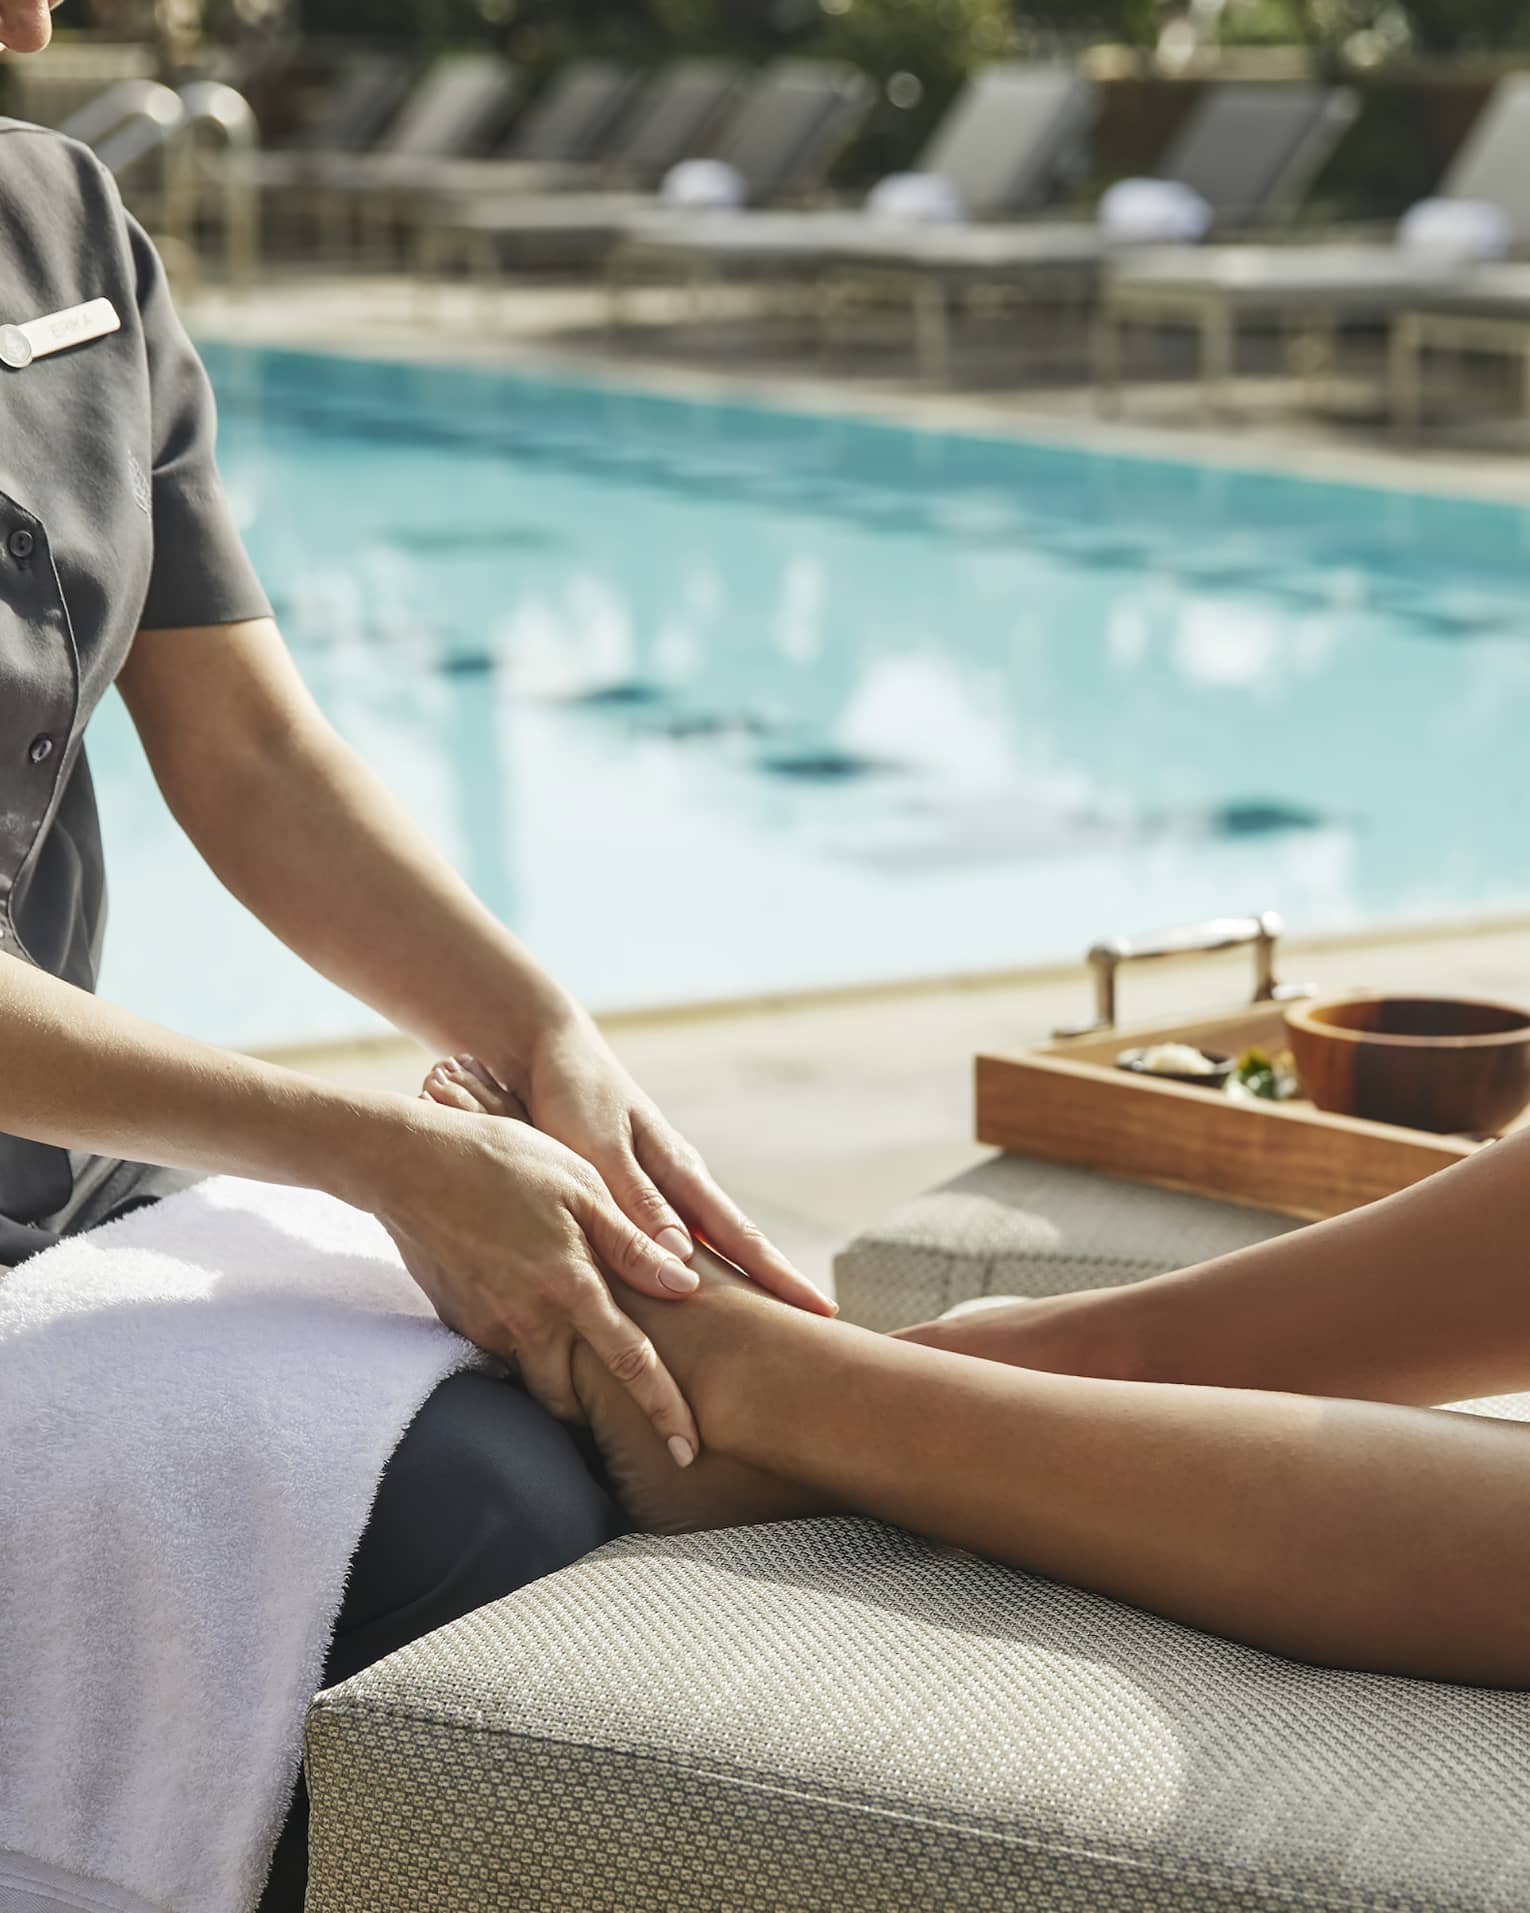 A person receiving a massage next to a pool outside.